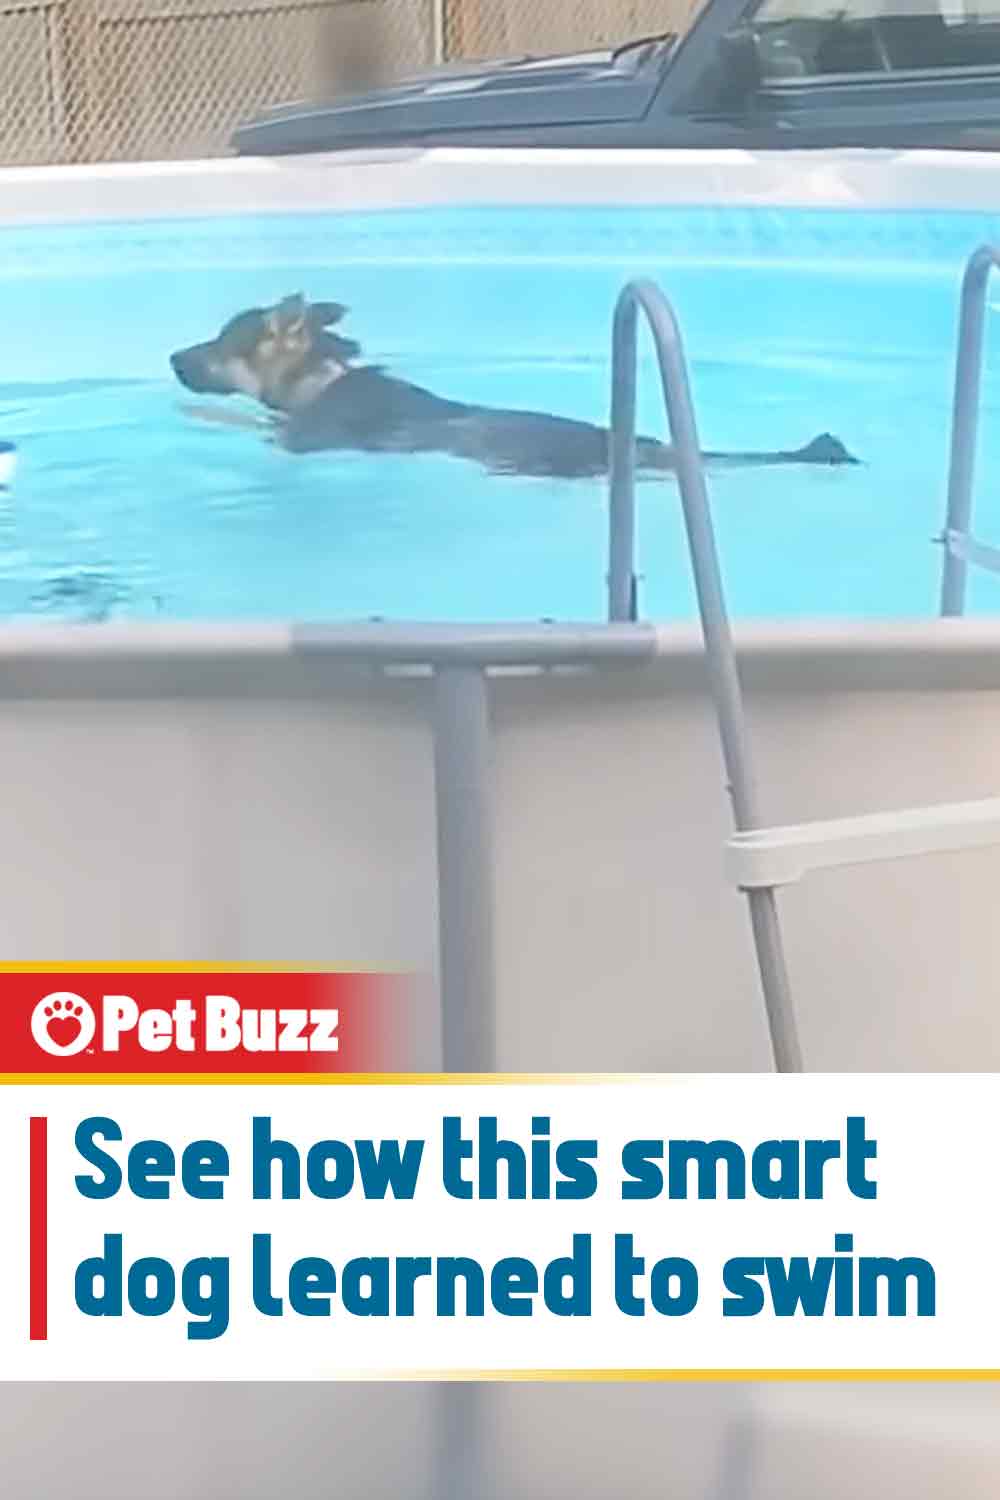 See how this smart dog learned to swim